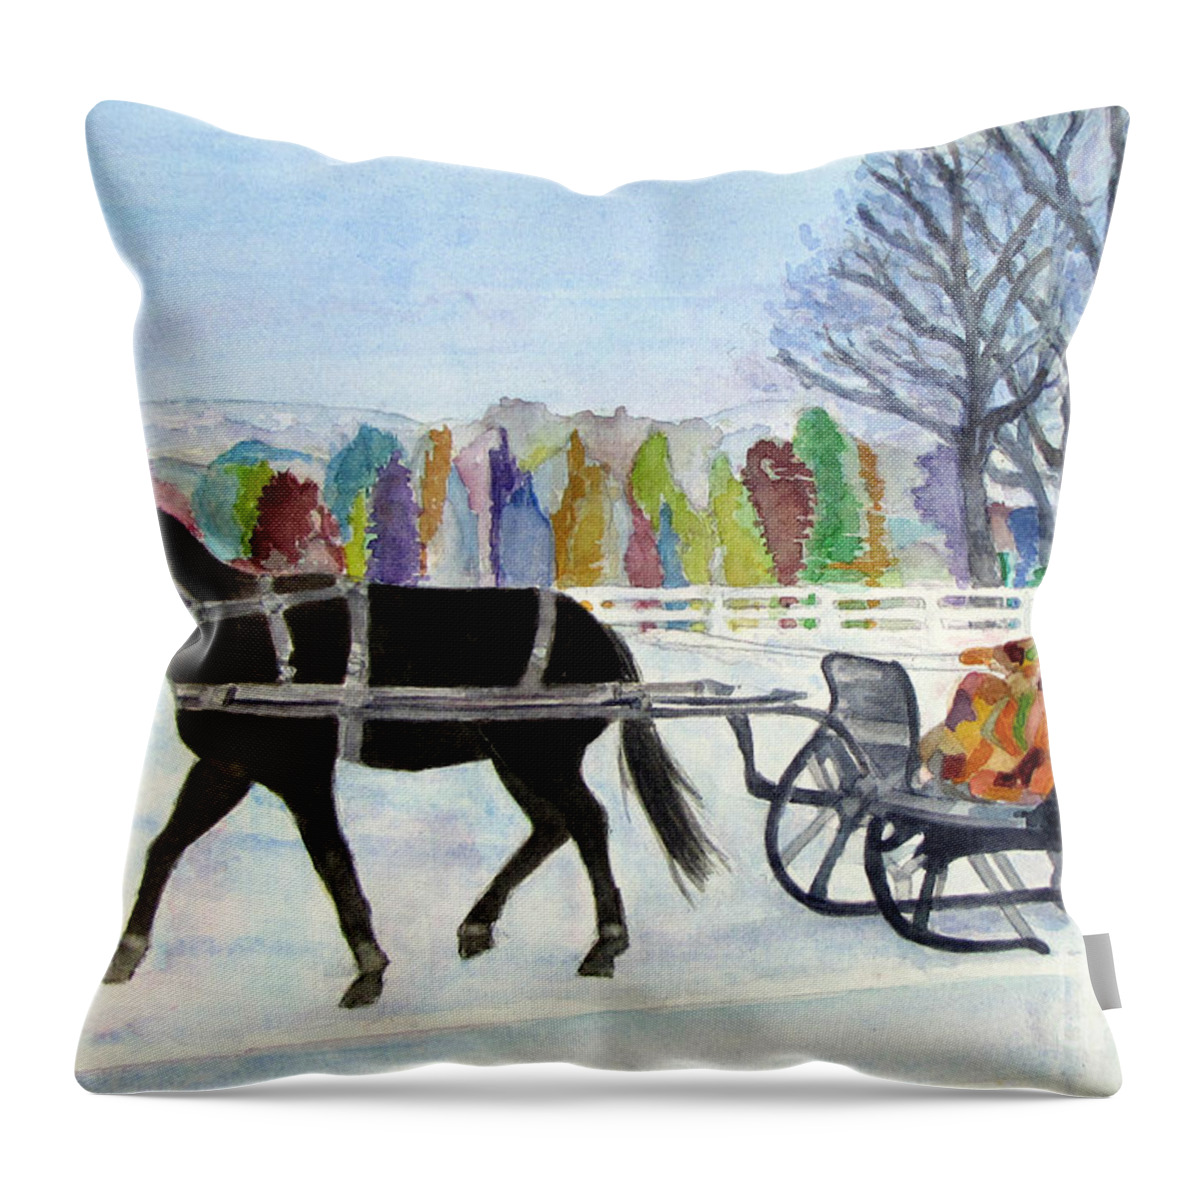 Winter Throw Pillow featuring the painting Winter Sleigh Ride by Carol Flagg